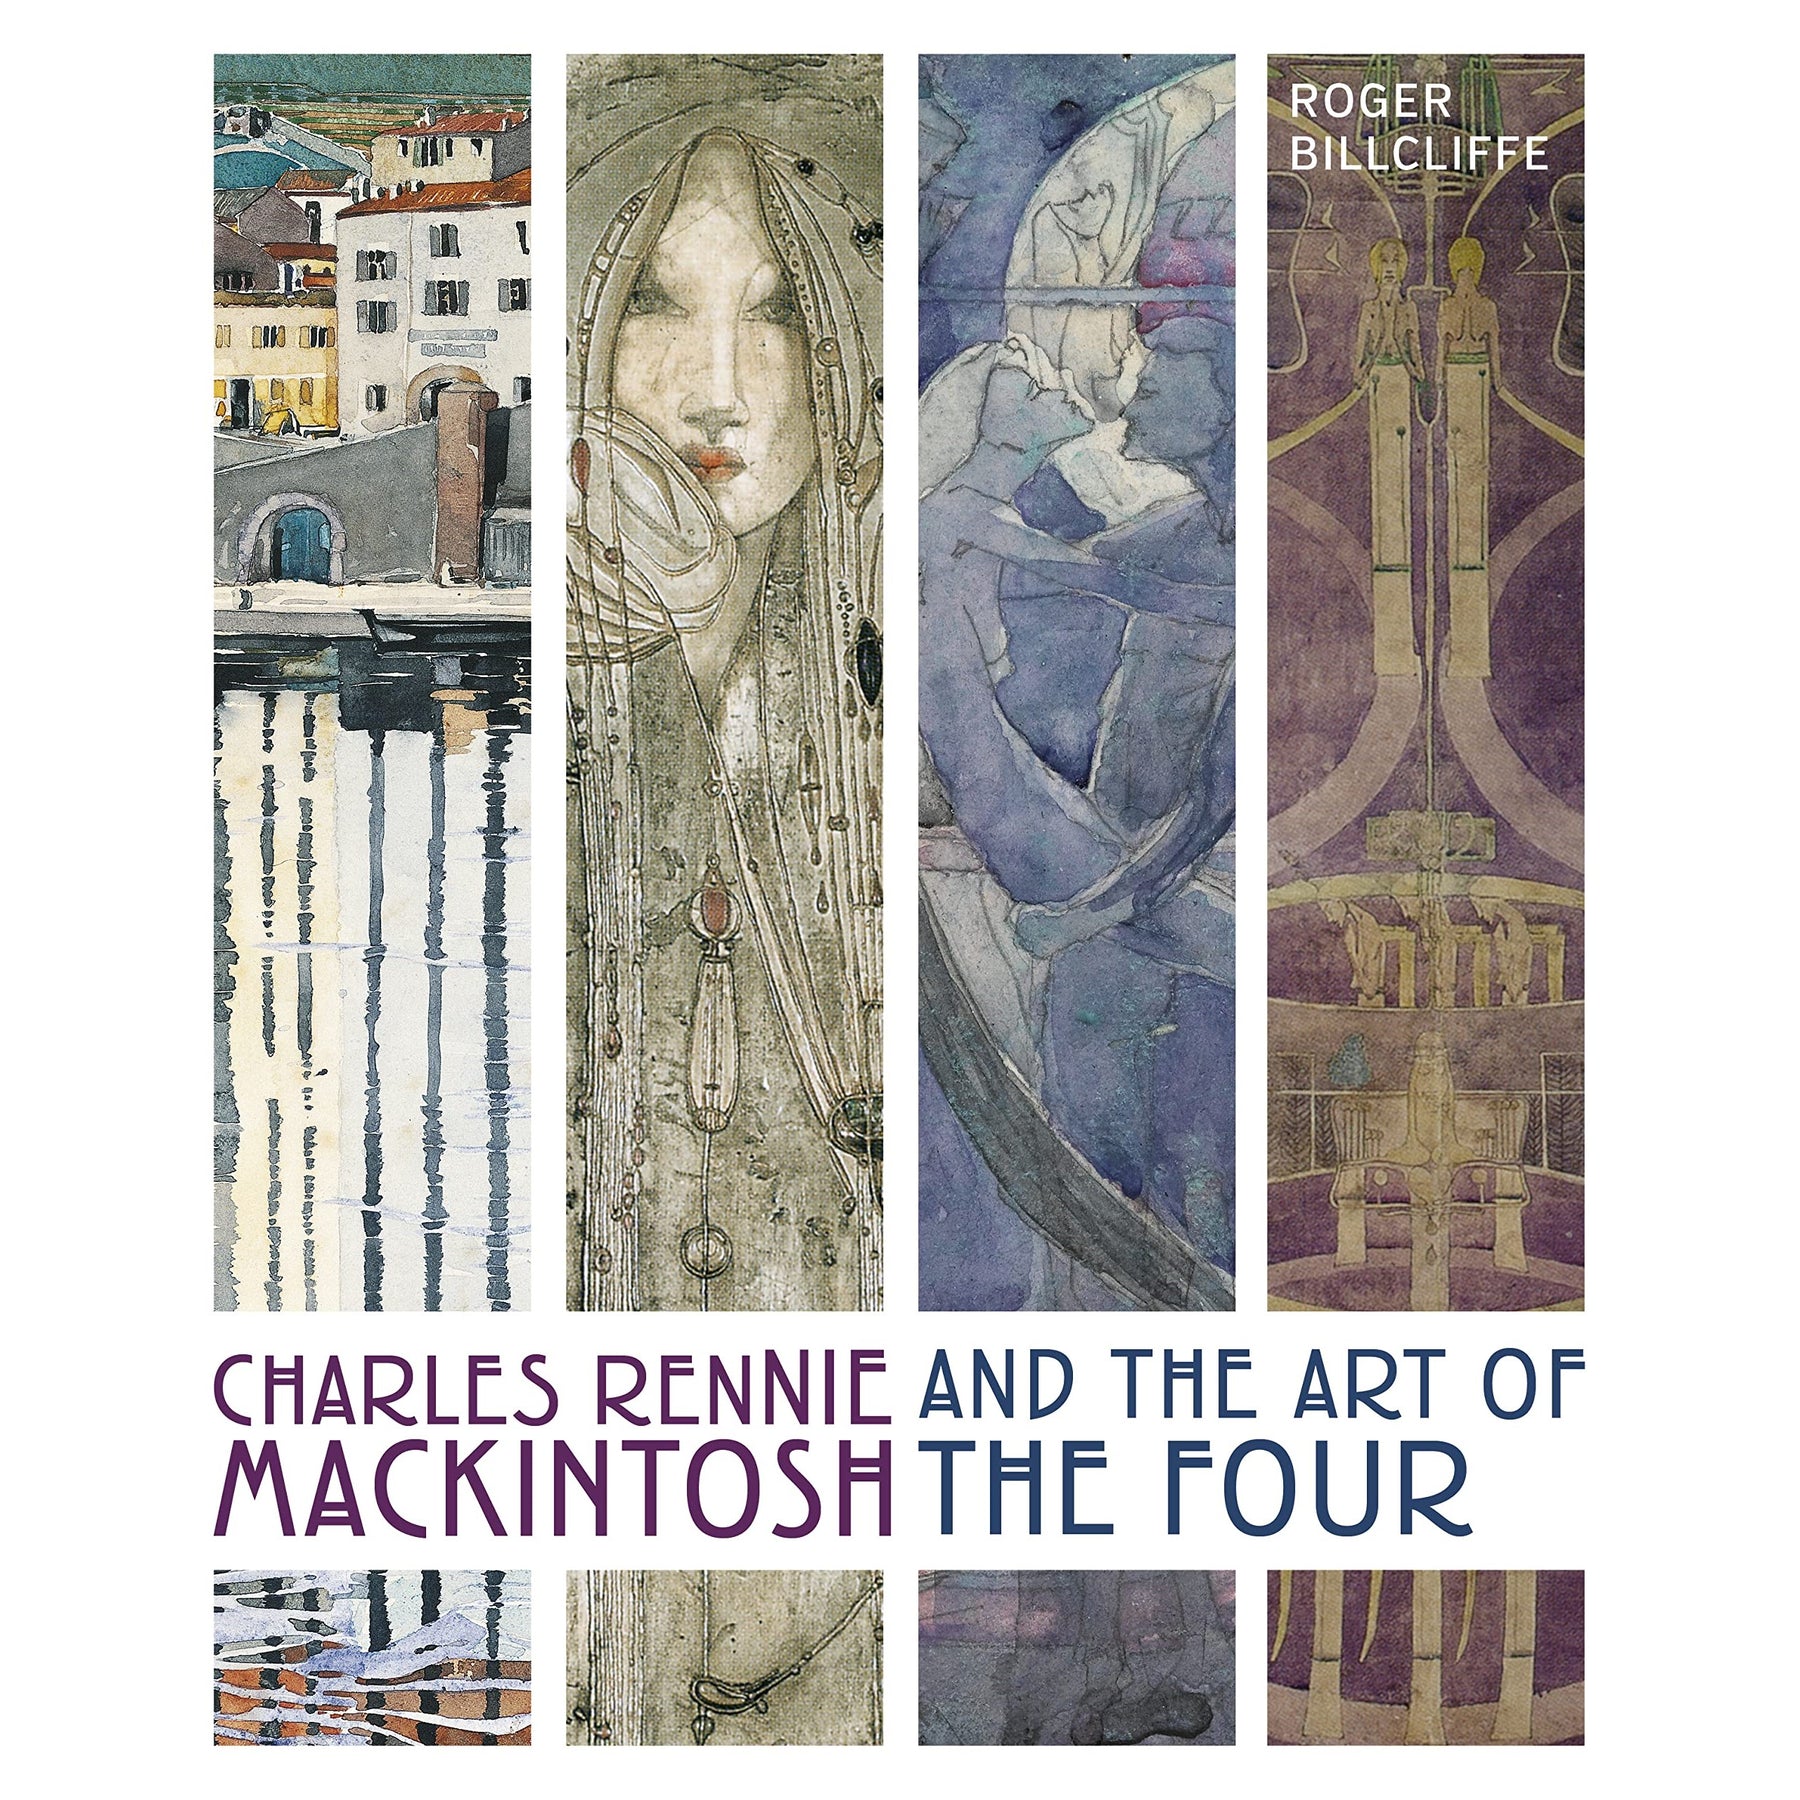 Charles Rennie Mackintosh & the Art of the Four Book